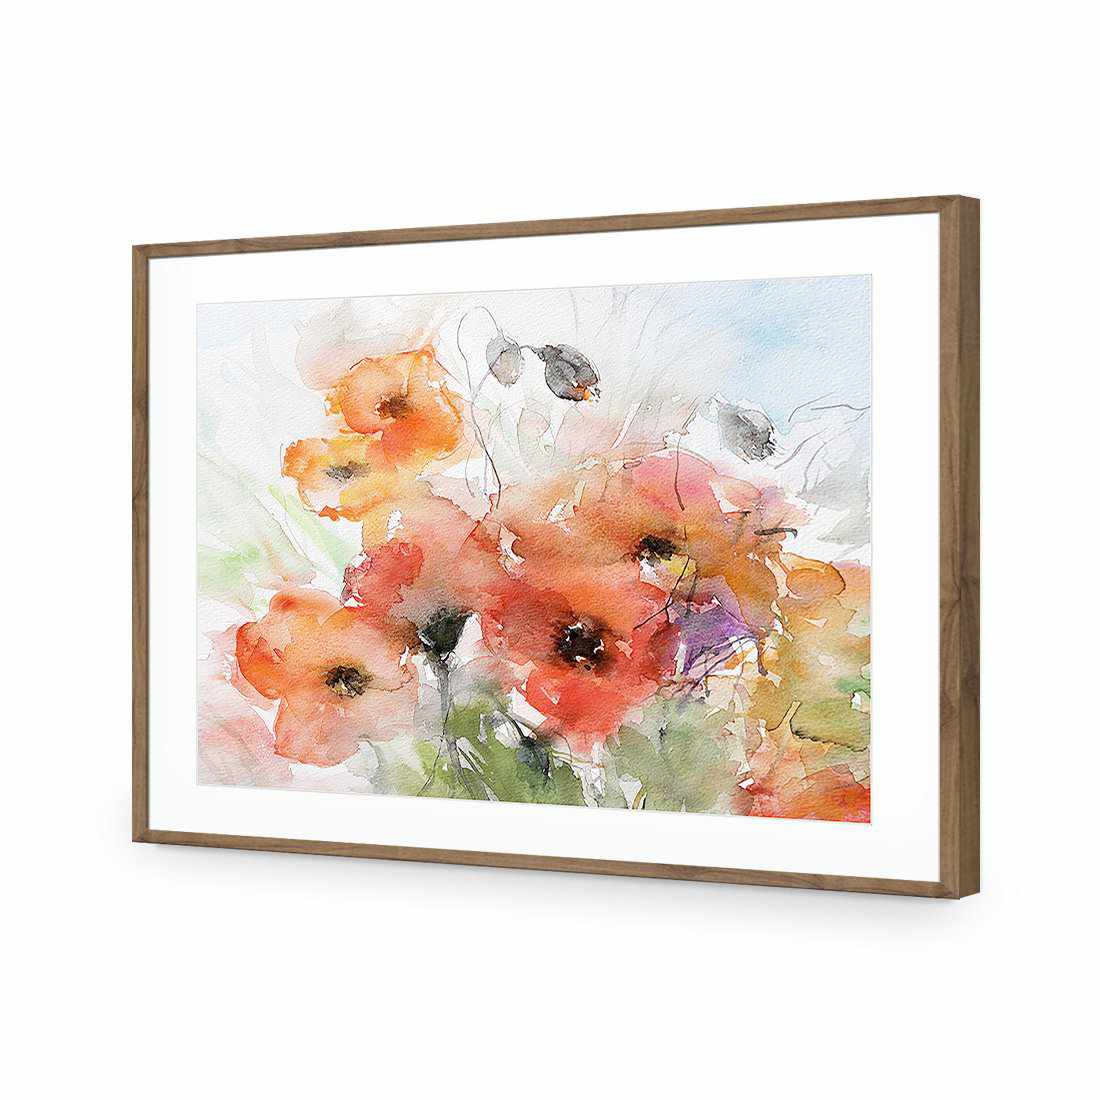 Watercolour Poppies-Acrylic-Wall Art Design-With Border-Acrylic - Natural Frame-45x30cm-Wall Art Designs